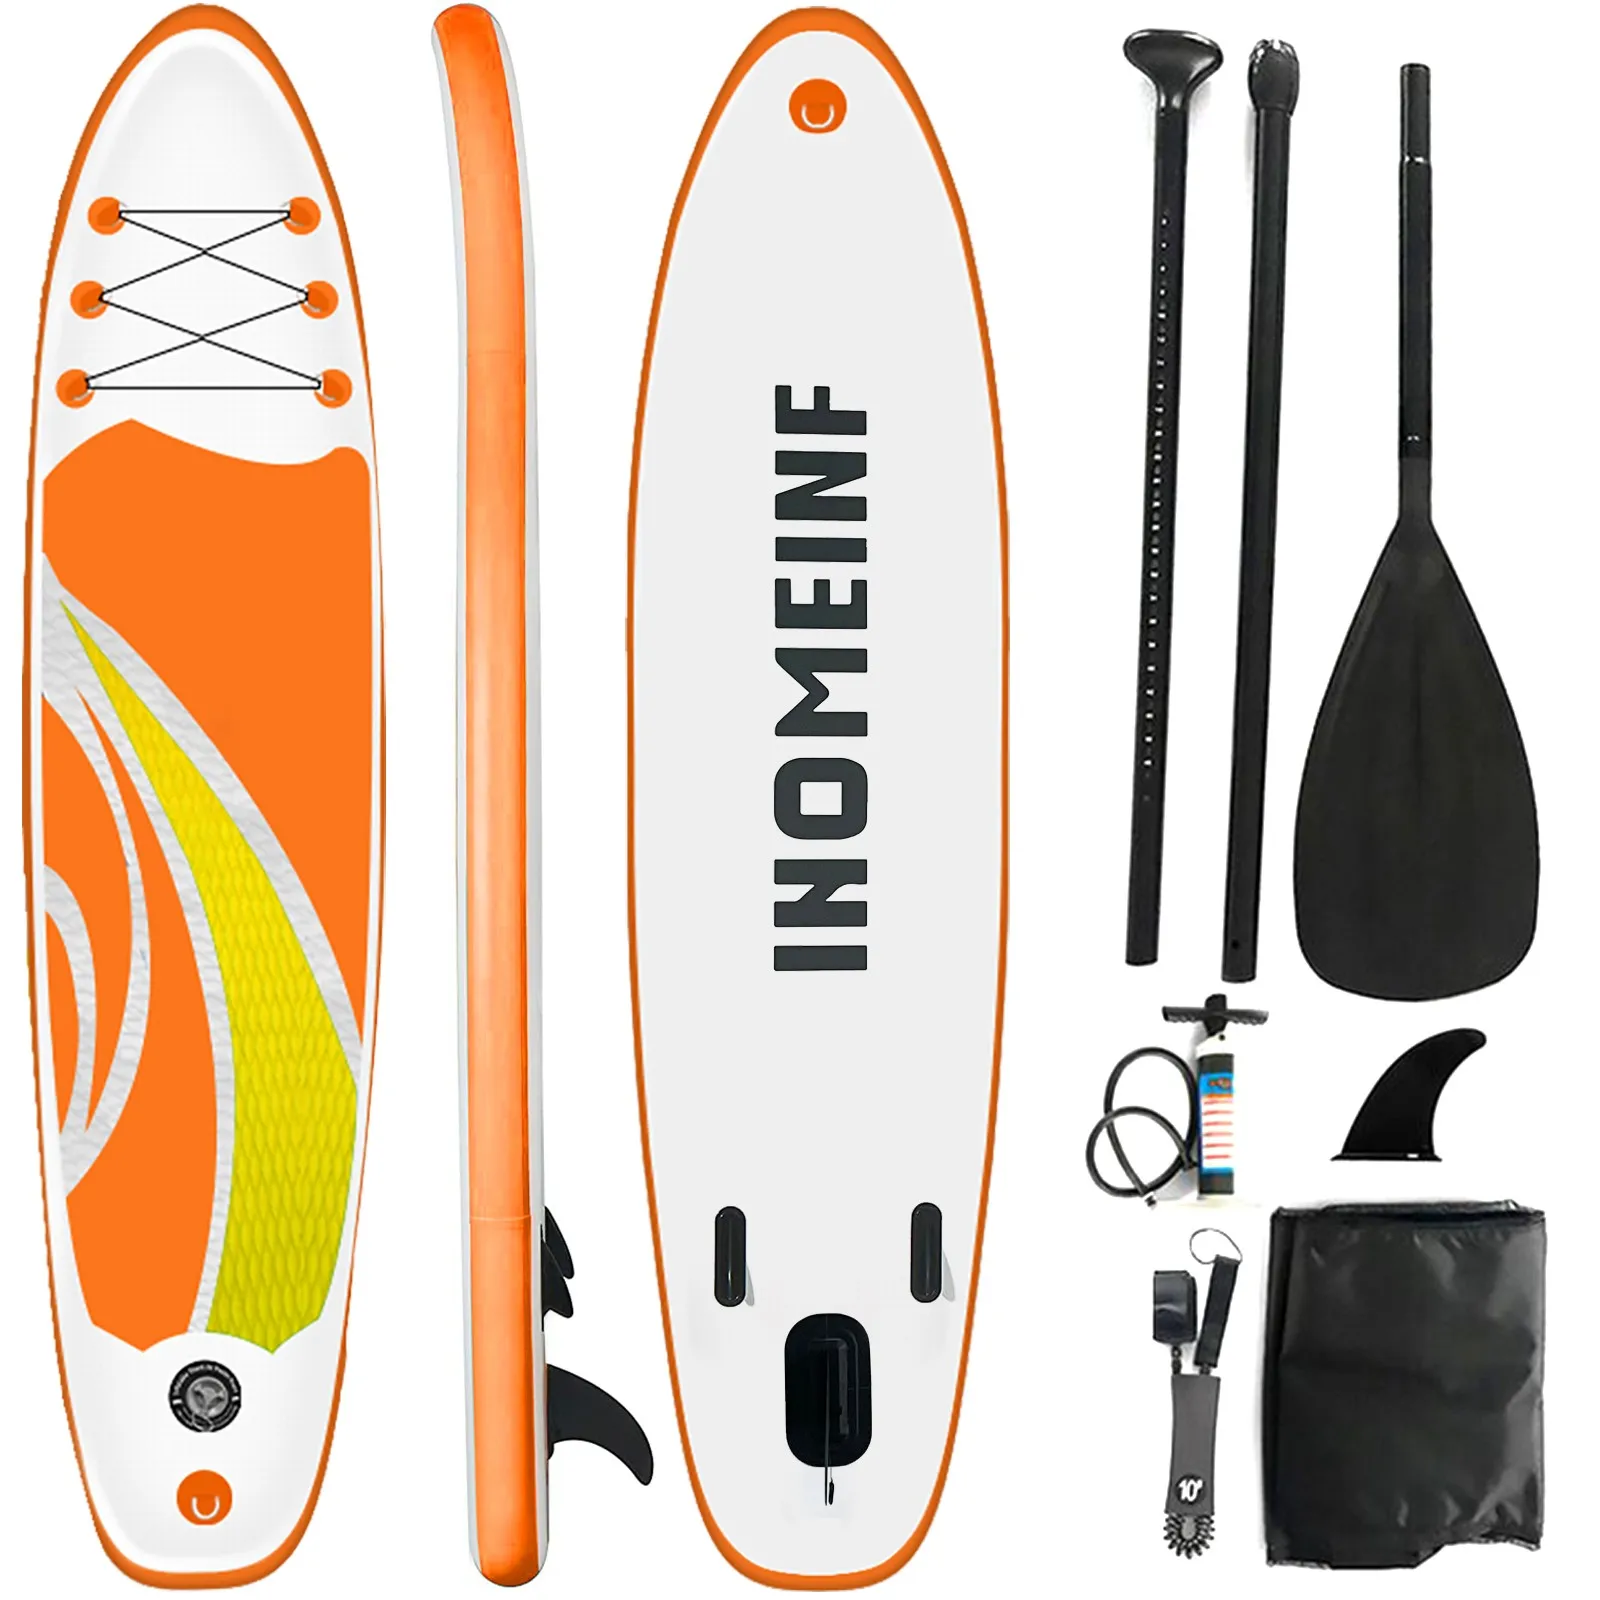 

New Arrival Inflatable SUP Board 10'6"x 30''x 6" ISUP Stand Paddle Water Sport Surfing Surfboard